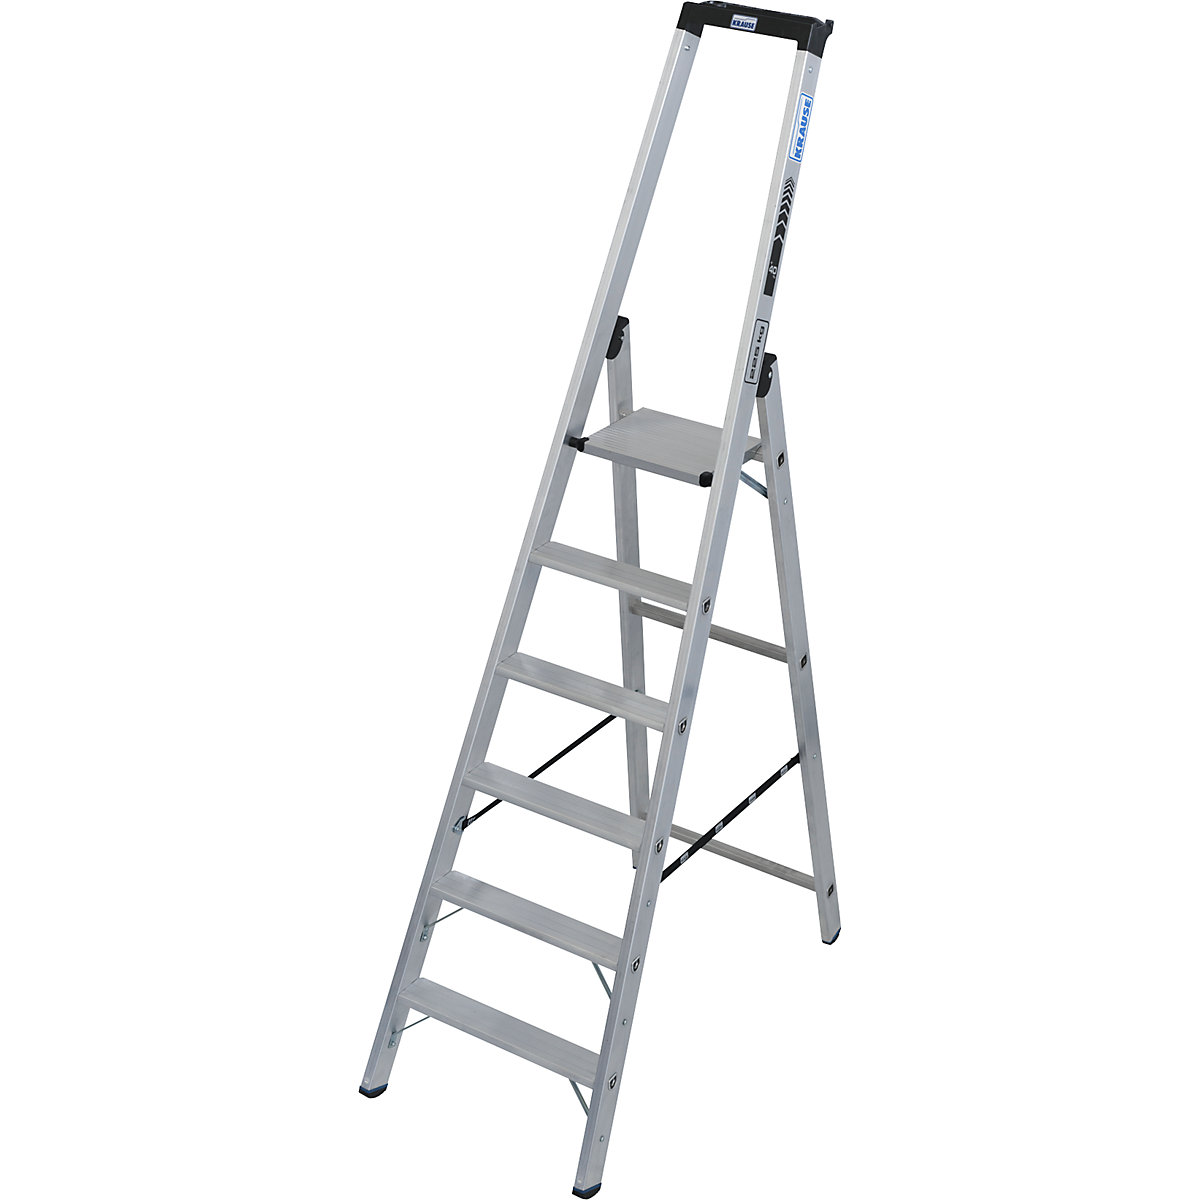 Heavy duty step ladder – KRAUSE, single sided access, up to 225 kg, 6 steps incl. platform-4